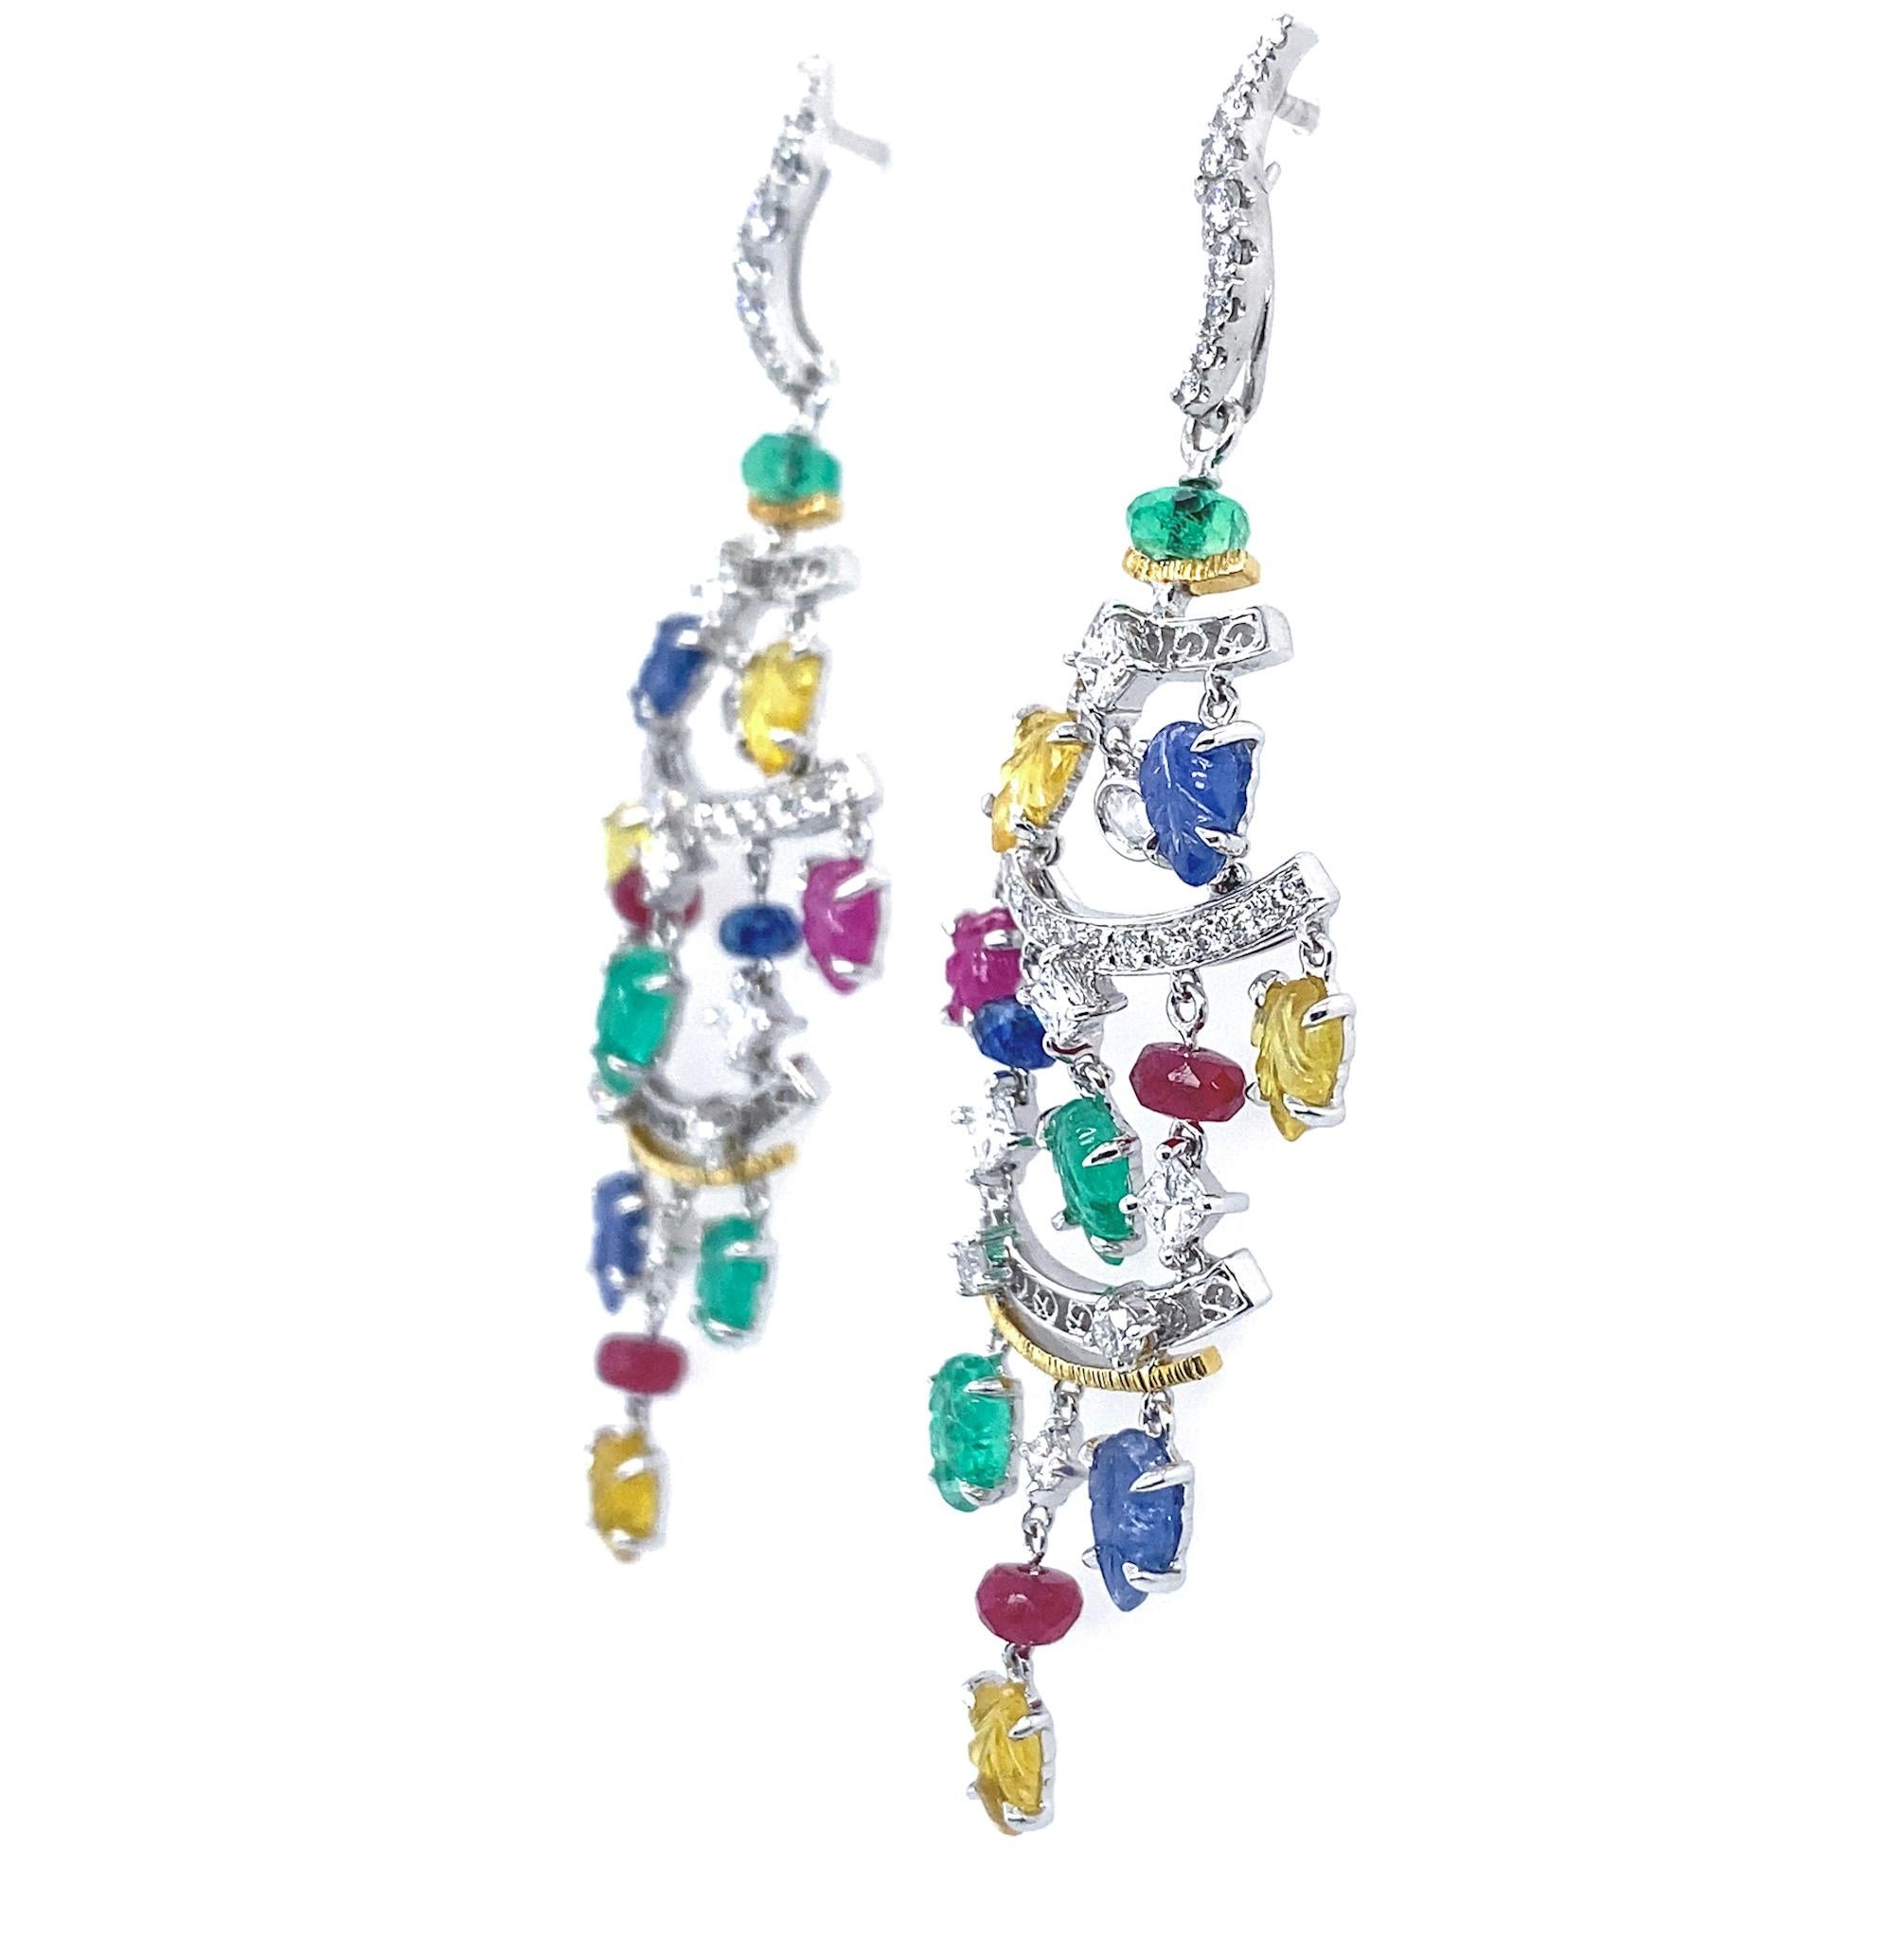 This pair of playfully elegant earrings is designed by the renowned Hong Kong jewelry designer, Ms. Dilys Young. Dilys’ artfully mixes 4.48 carats of carved fancy colored sapphires, 1.42 carats of ruby beads, along with a carefully selected